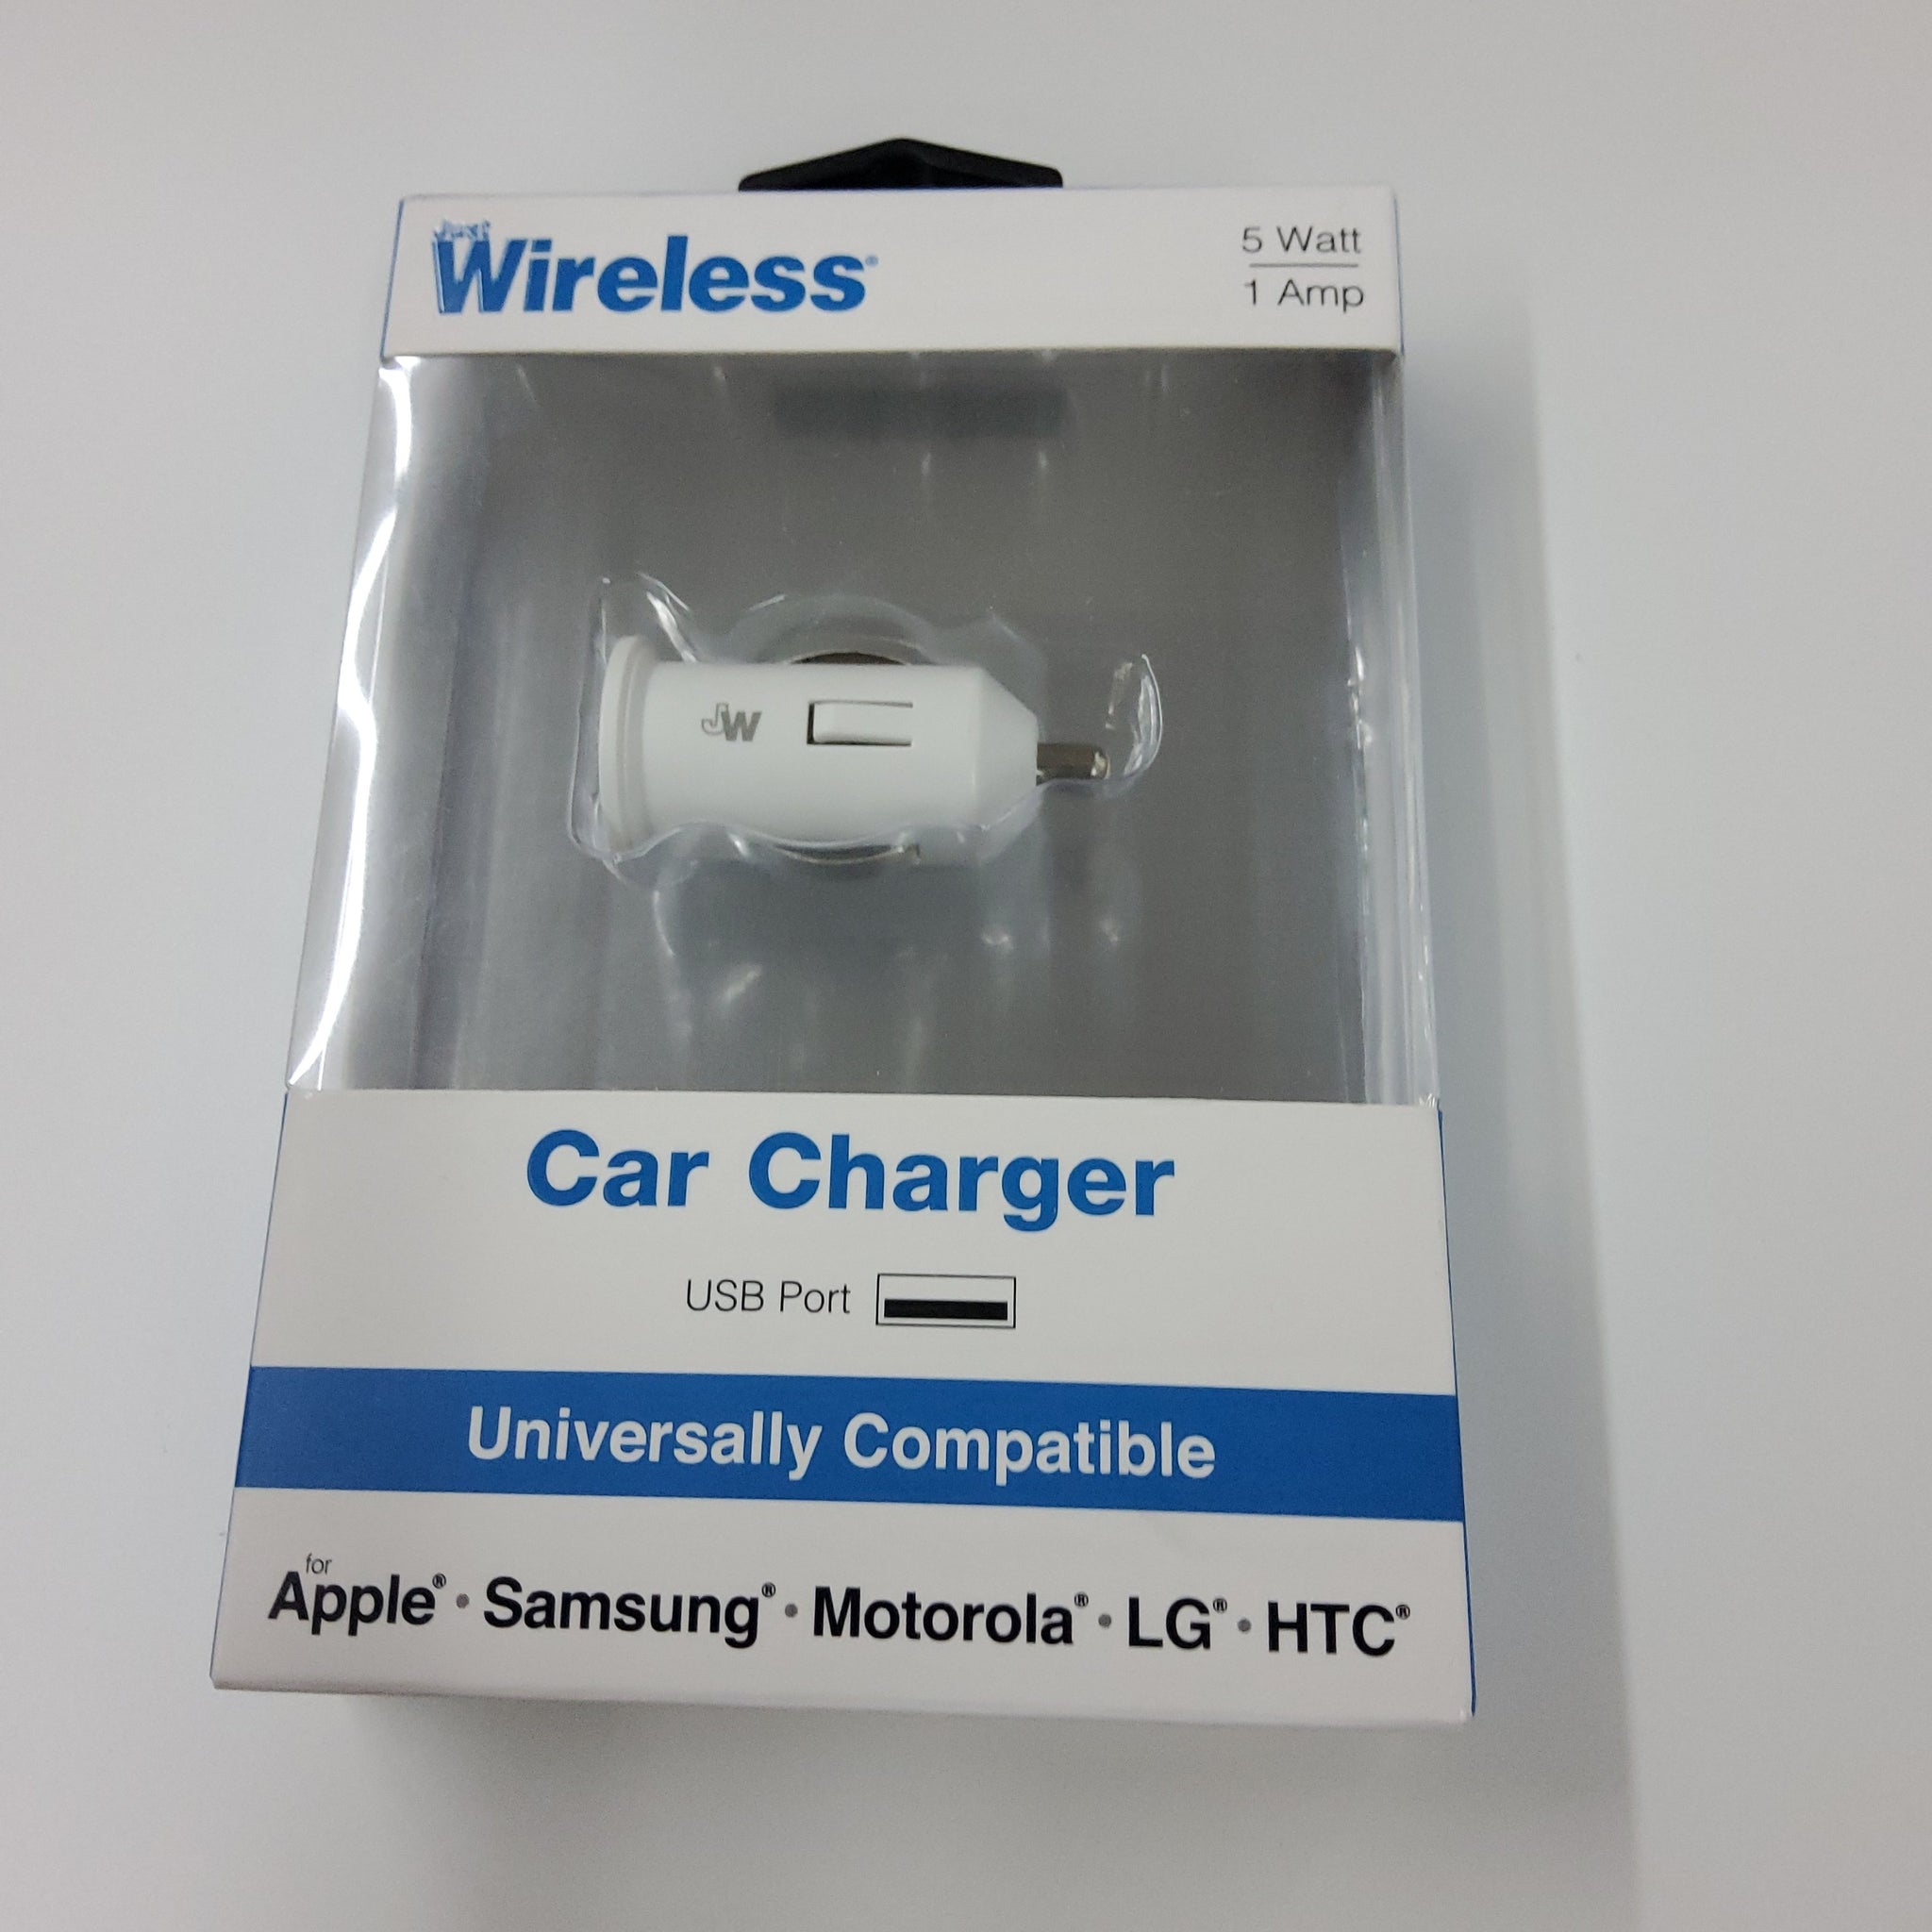 Just Wireless 1.0A/5W 1-Port USB-A Car Charger - White 